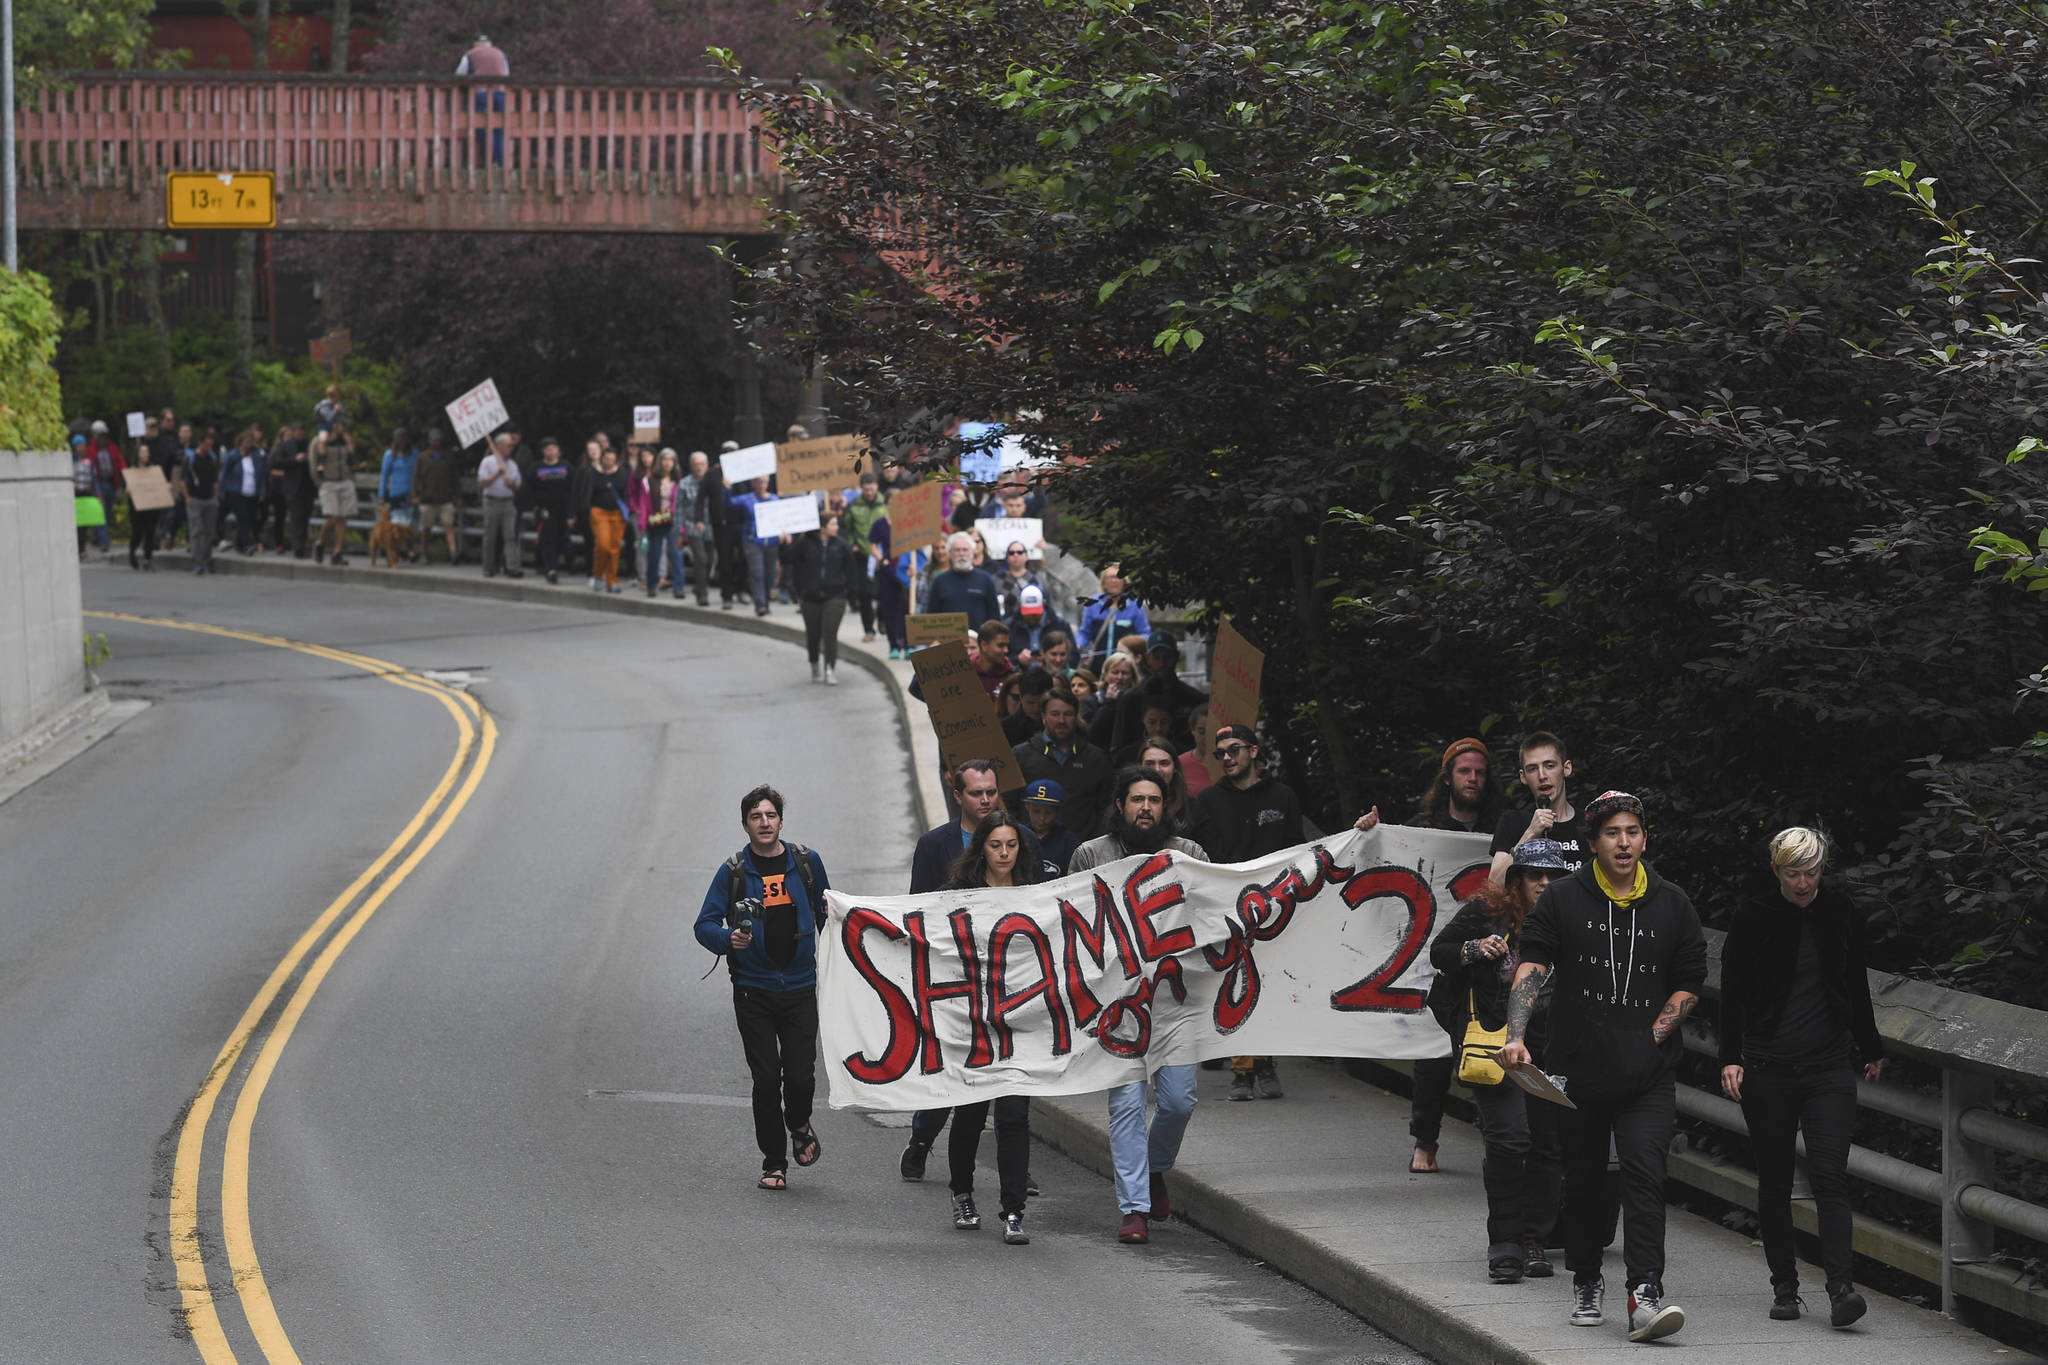 Over hundred people gather in front of the Governor’s Mansion to protest budget vetoes by Gov. Mike Dunleavy on Friday, July 12, 2019. (Michael Penn | Juneau Empire)